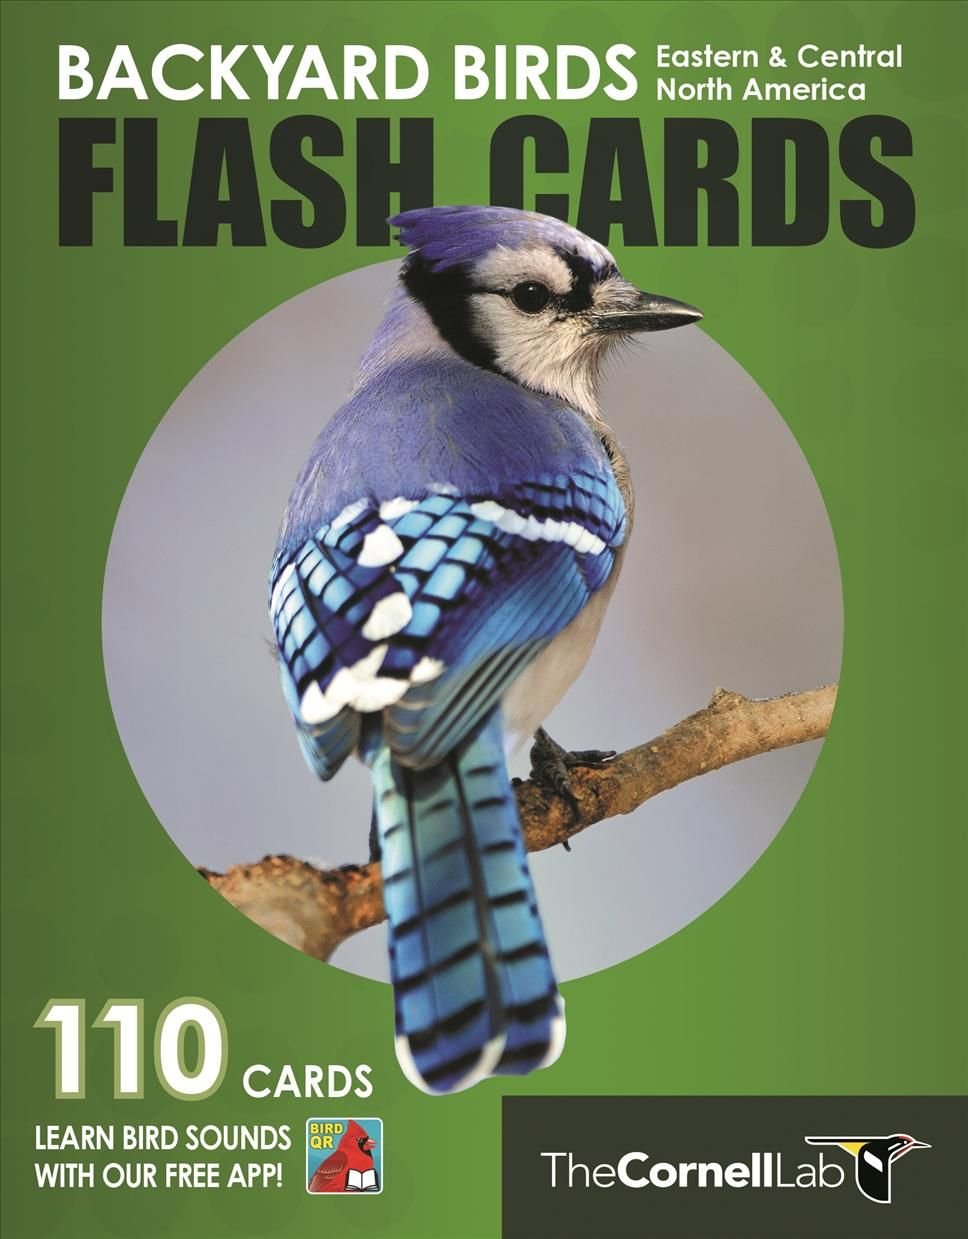 America　Cards　by　Ornithology　Flash　Central　With　Birds　Backyard　Lab　Cornell　Free　North　Buy　of　Eastern　Delivery